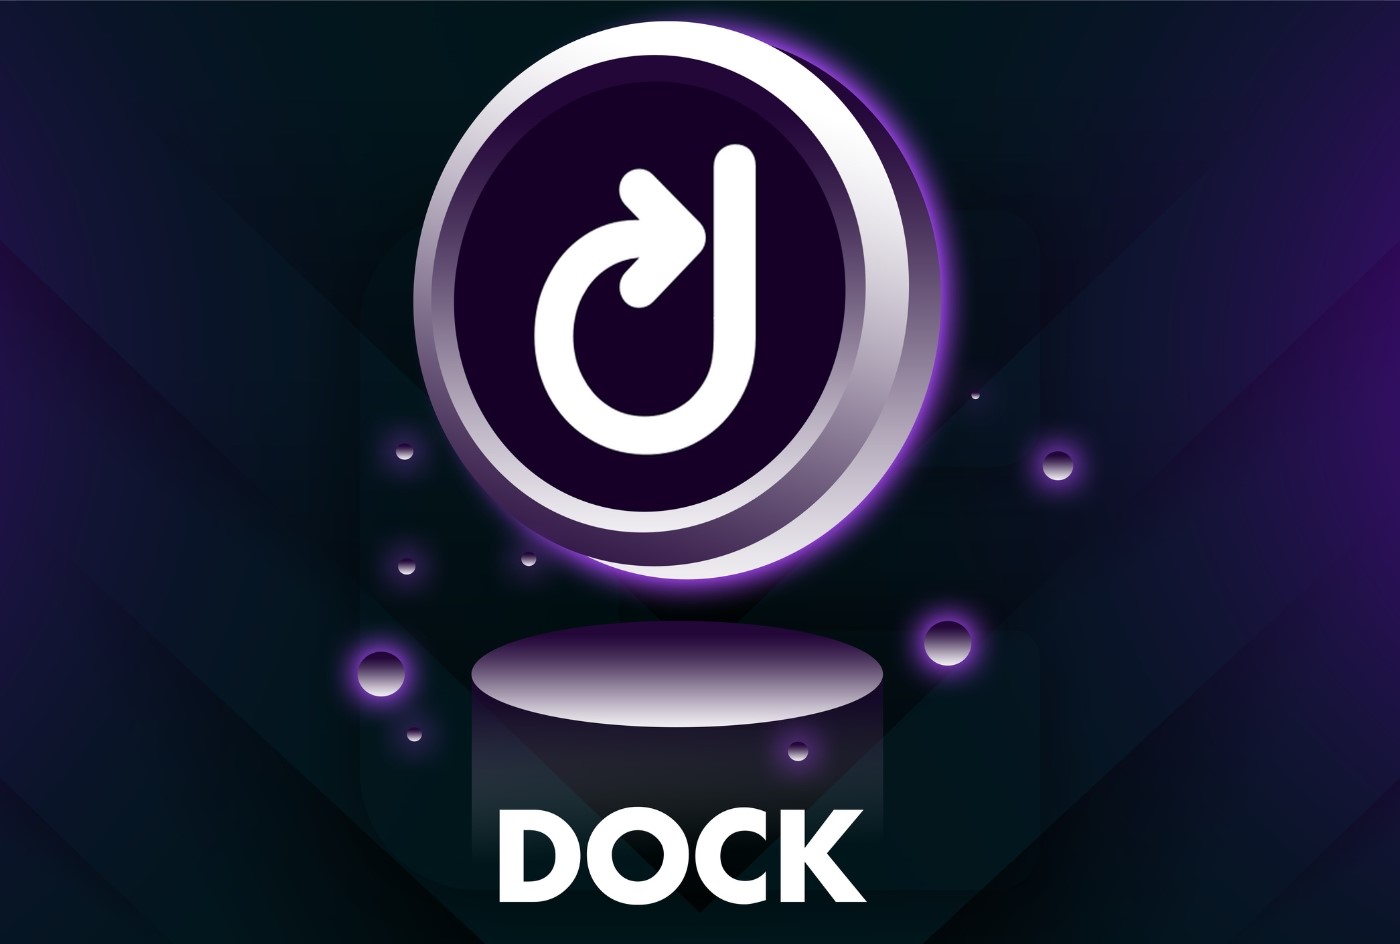 13-intriguing-facts-about-dock-dock